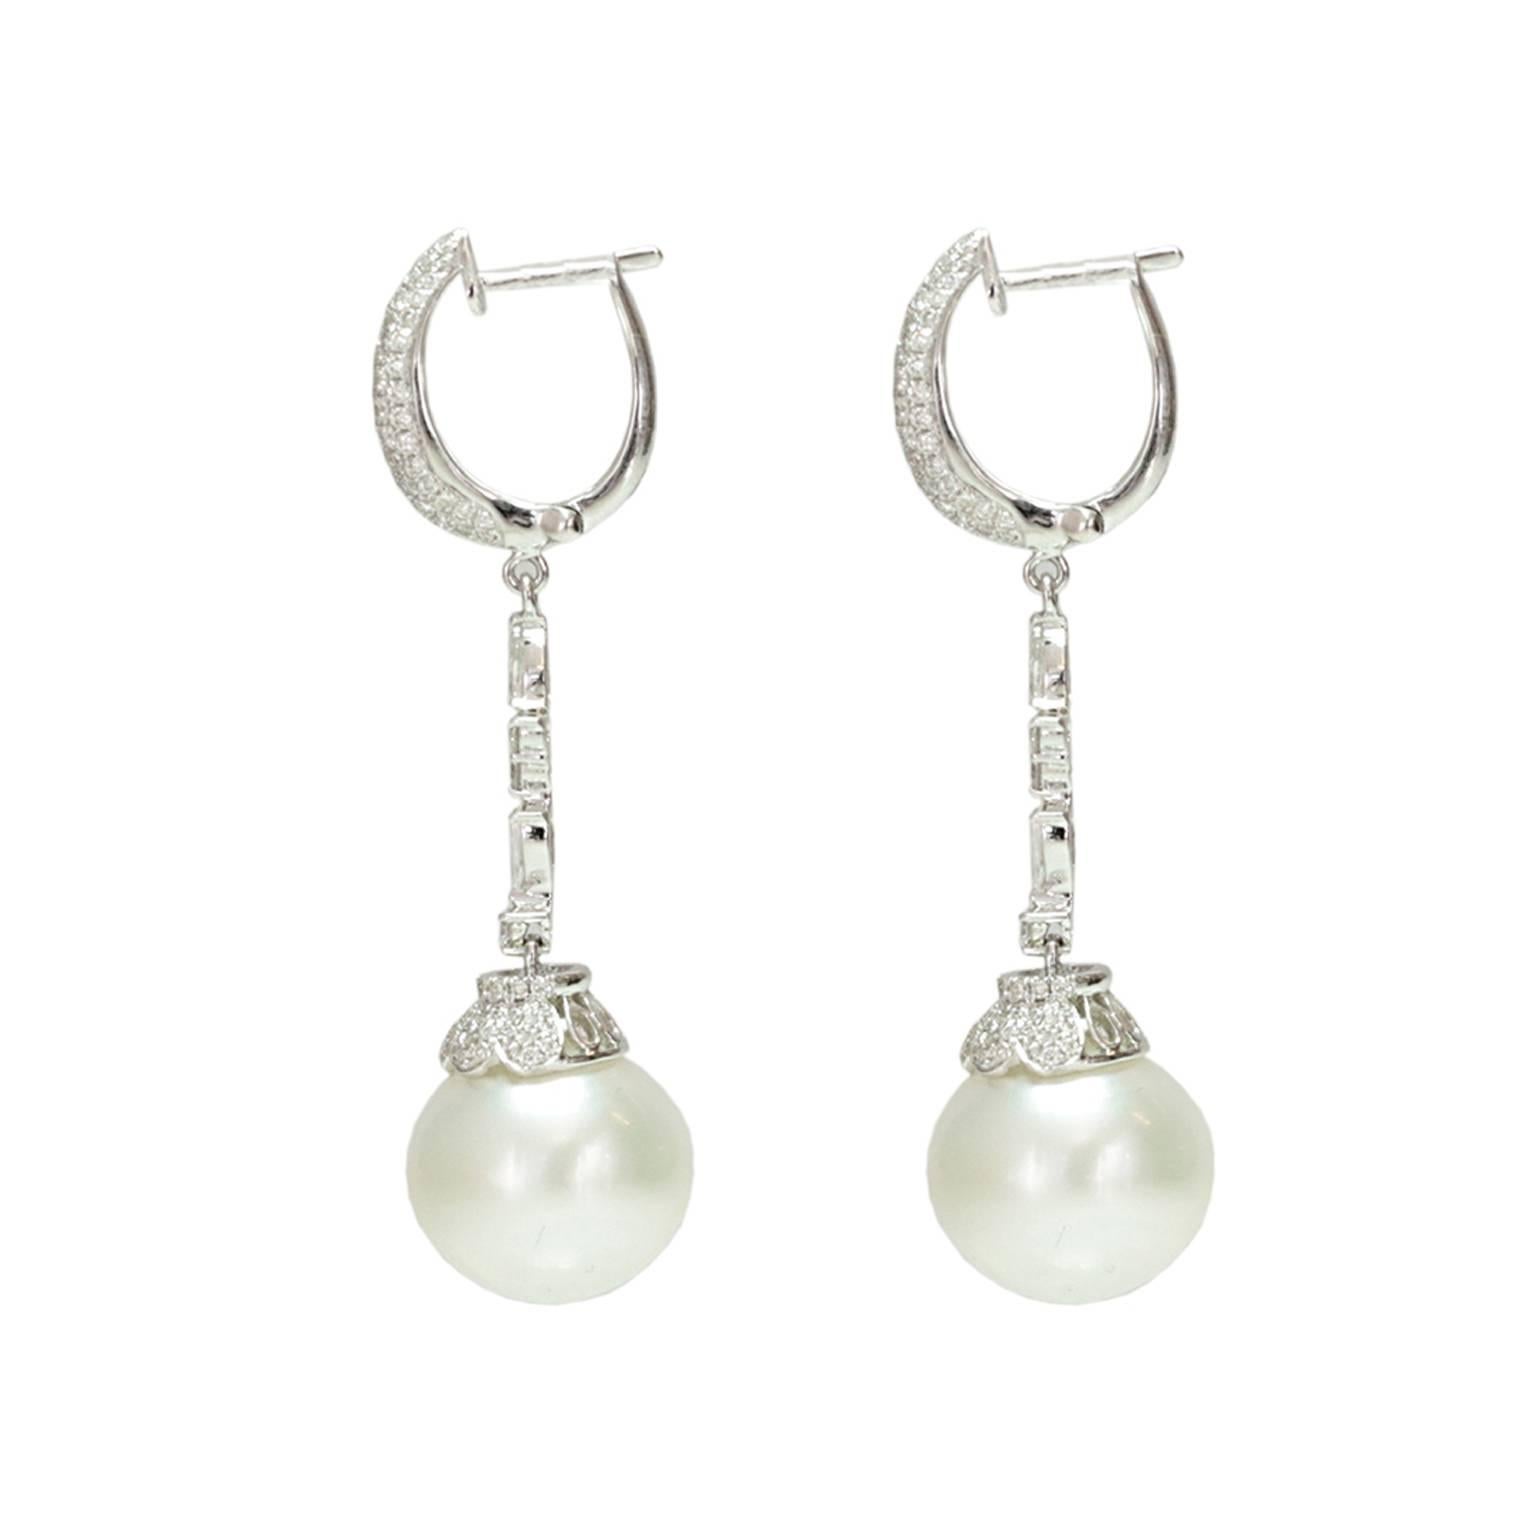 This elegant south sea pearl drop earring contains approx. 1.7ct of Diamonds with two 13.5mm pearl drops. 

48mm in length
Post / Lever Back